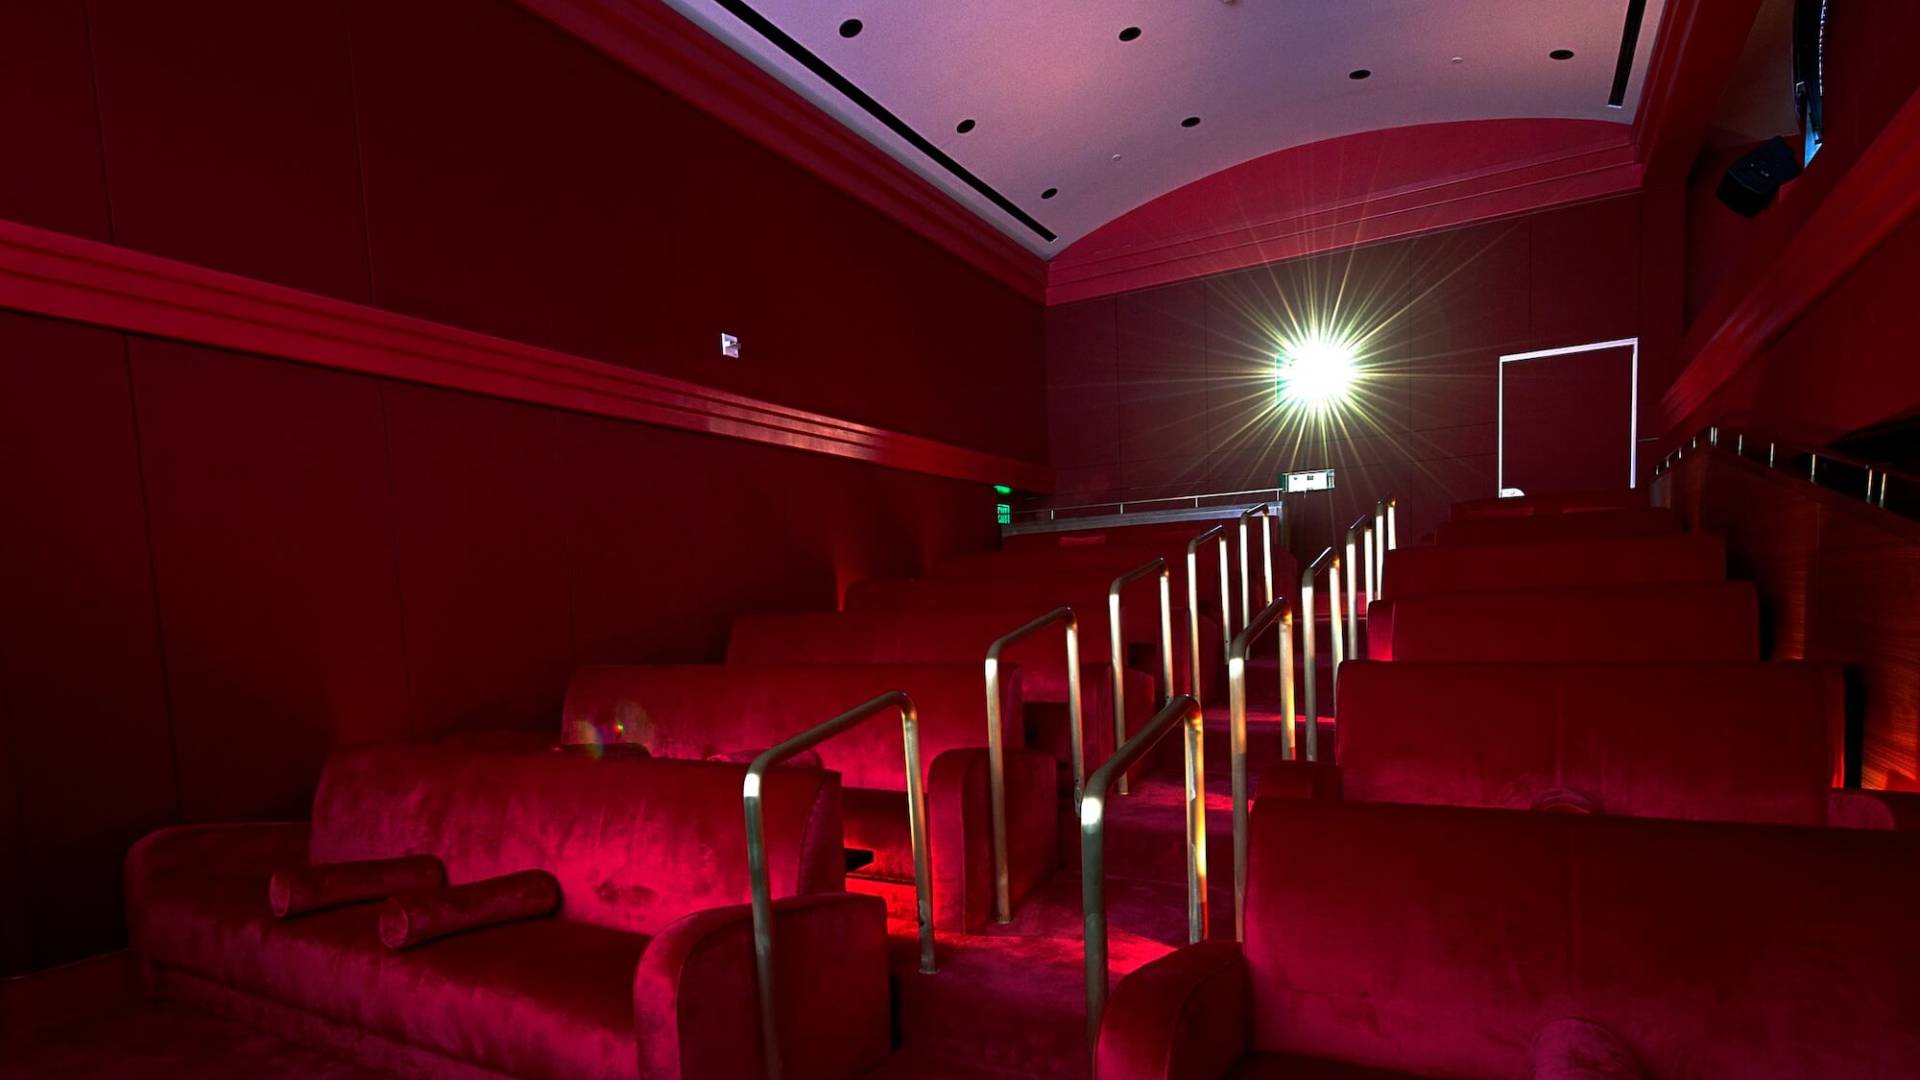 red velvet stairs and movie-theatre style seating with gold handrail with light from projector in background